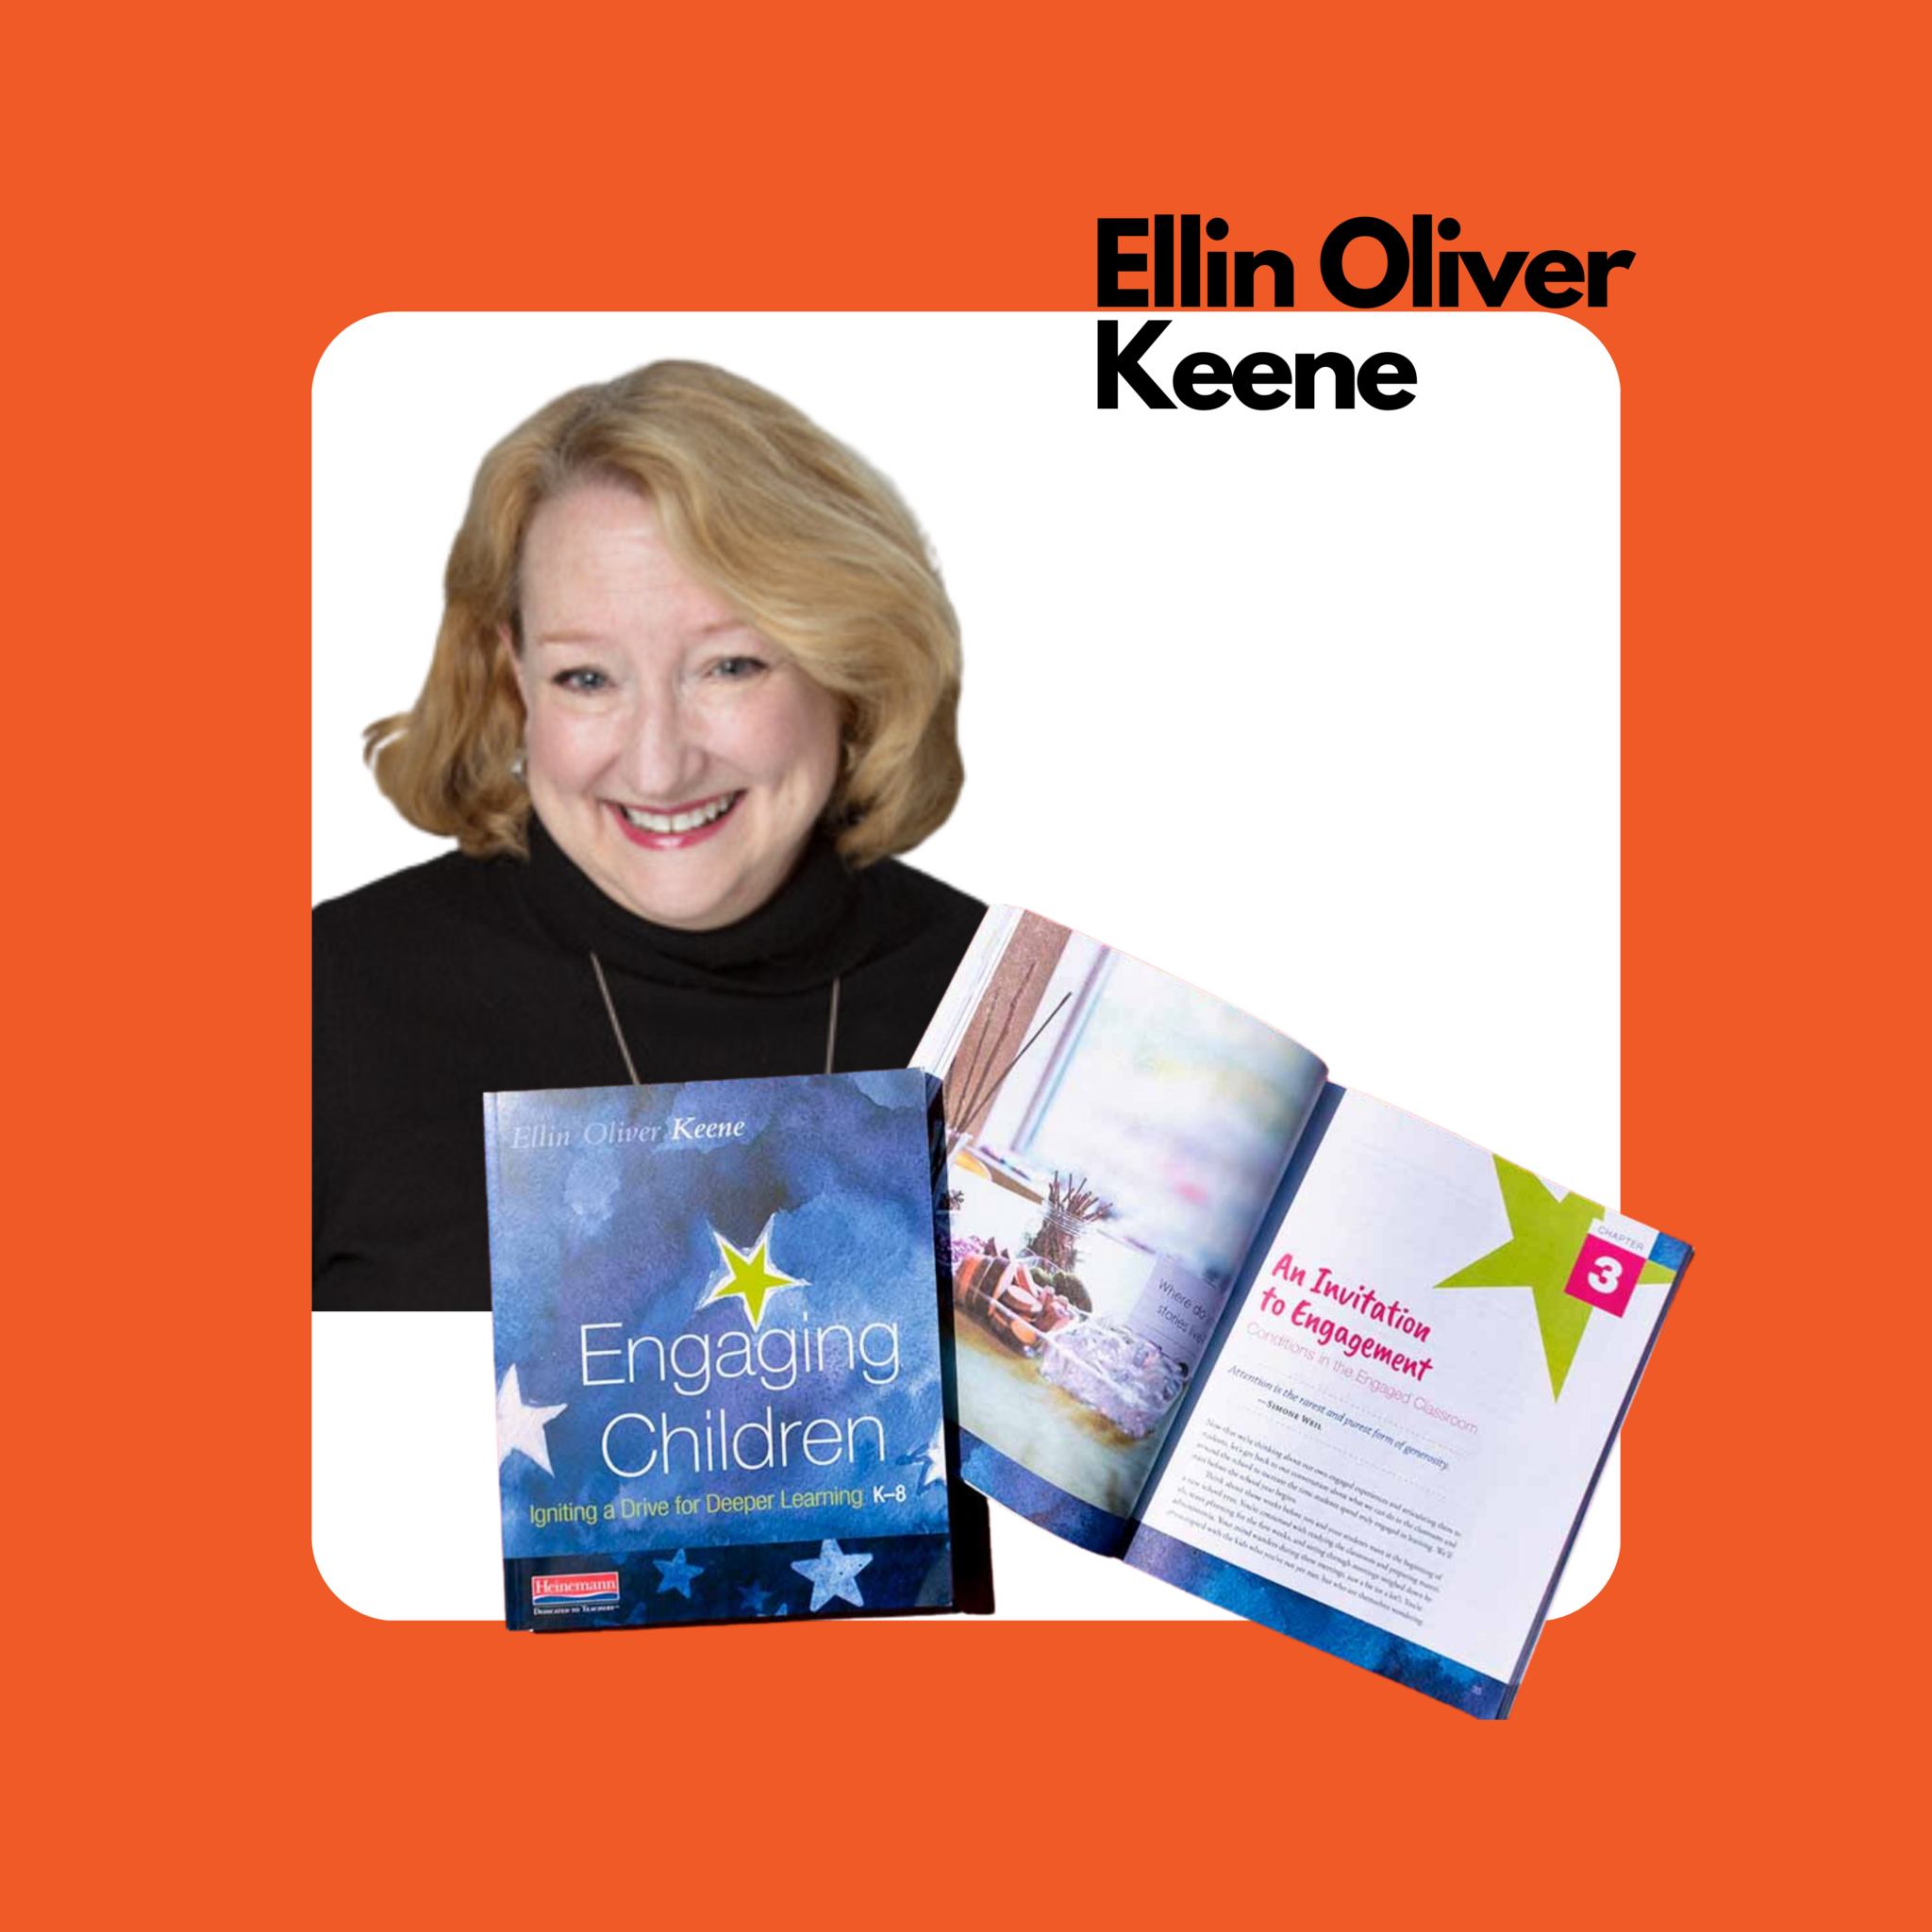 Ellin Oliver Keene with her book Engaging Children